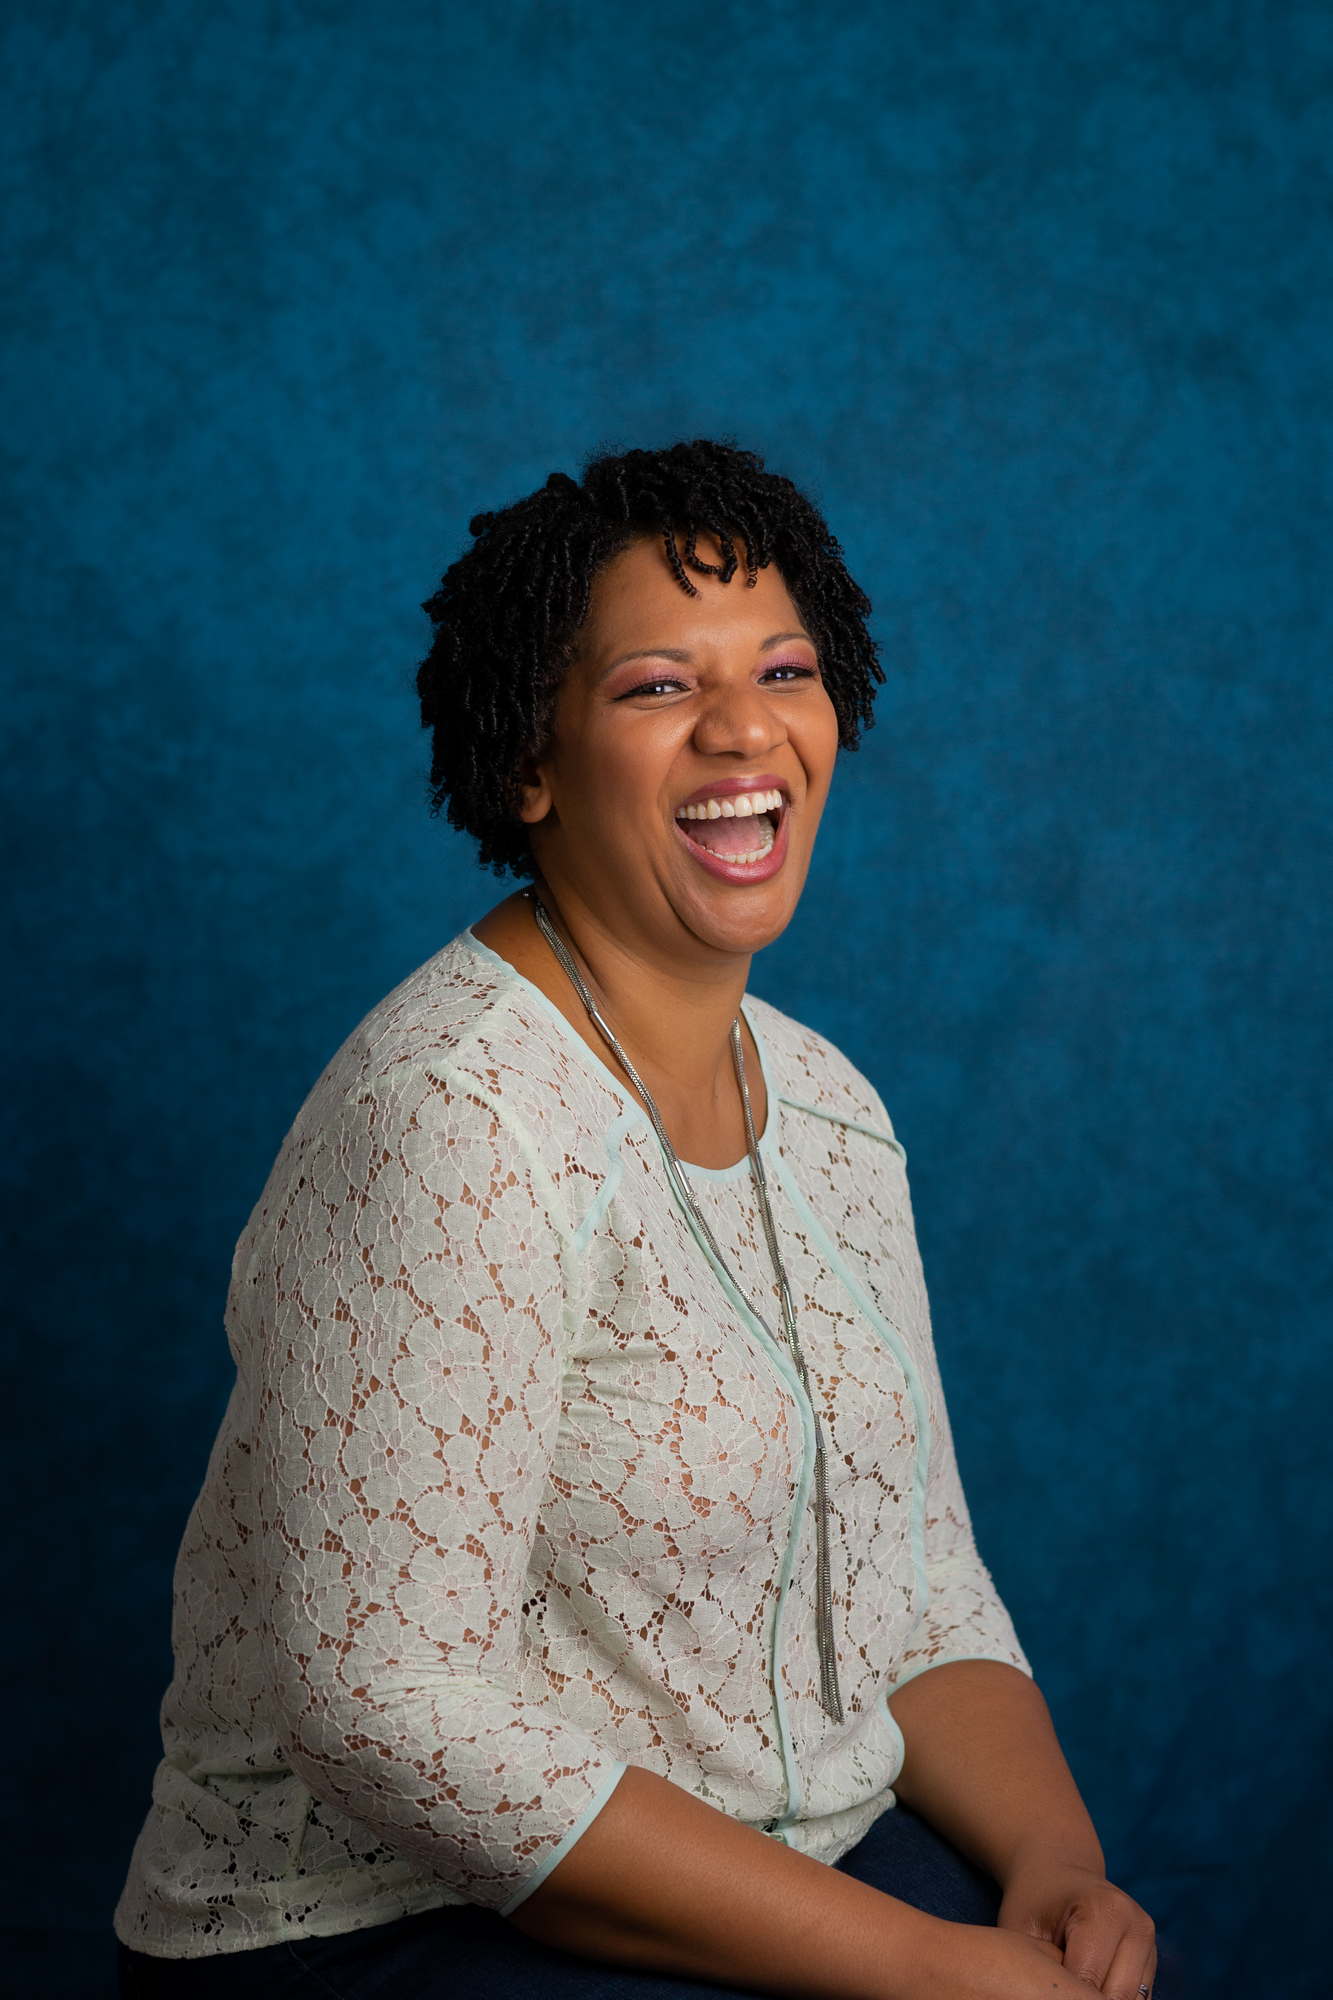 A Black woman laughs confidently during a business headshot session in the PNW